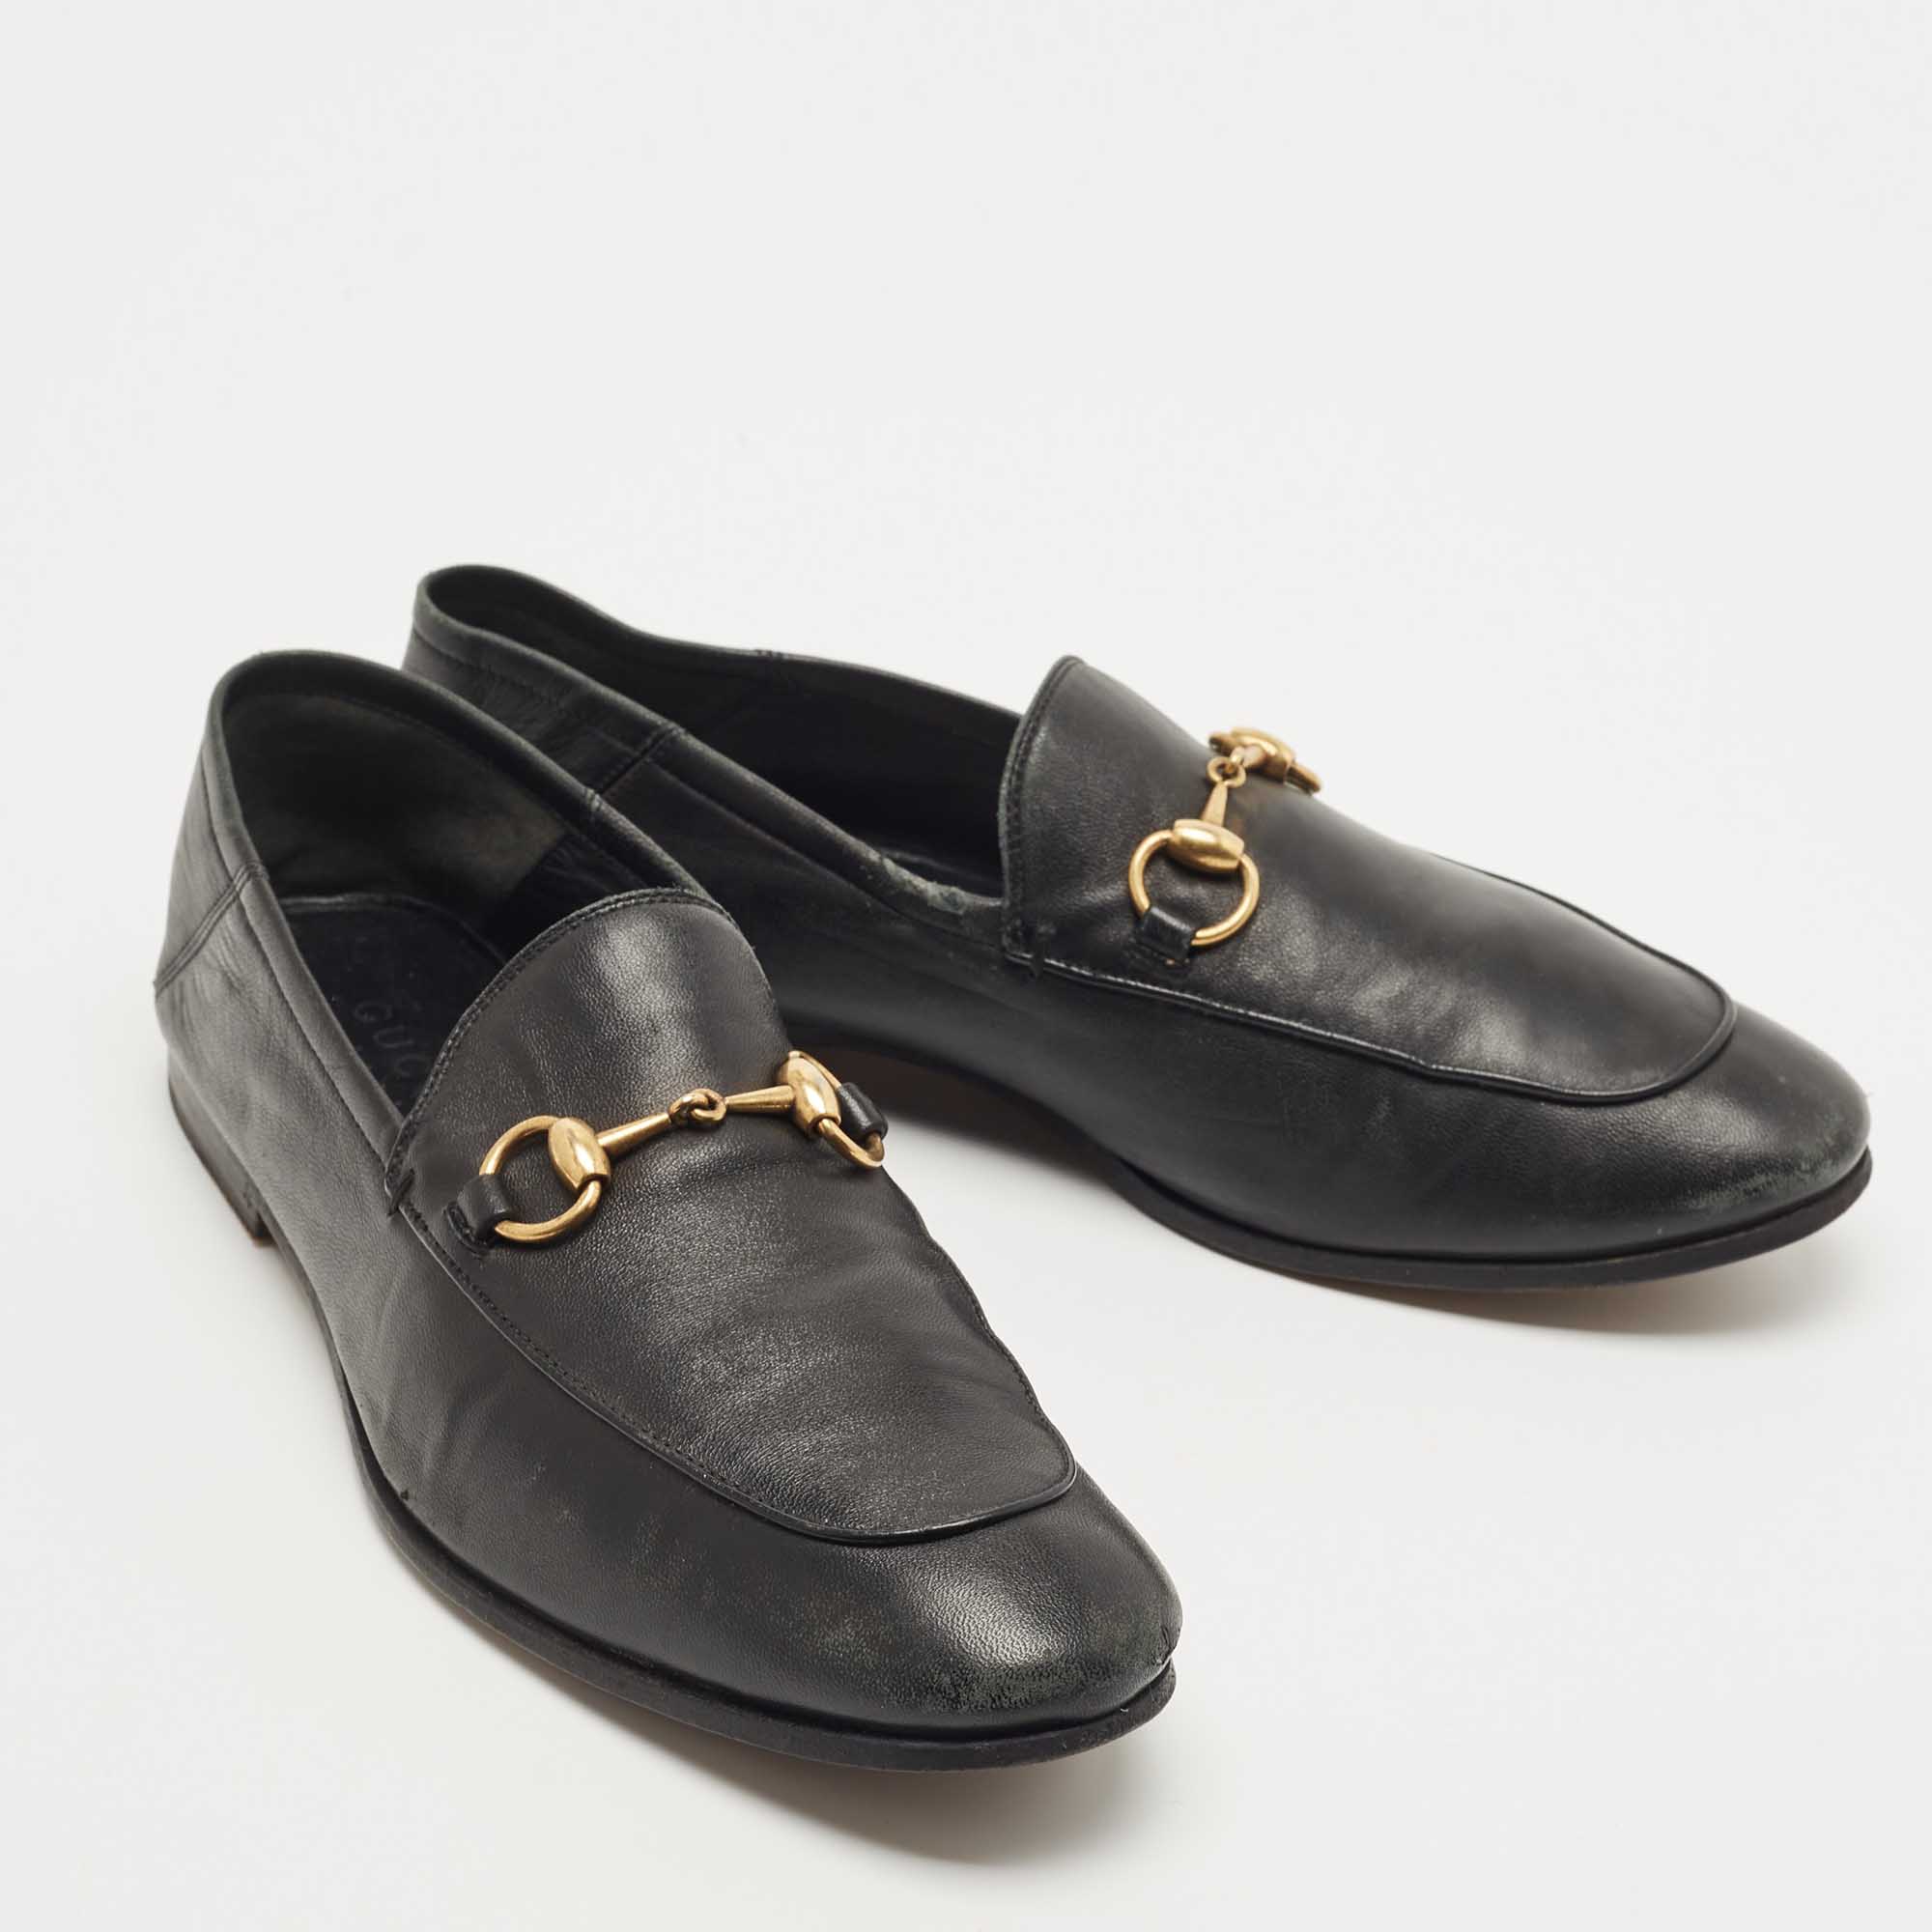 Gucci Black Leather Jordaan Loafers Size 42